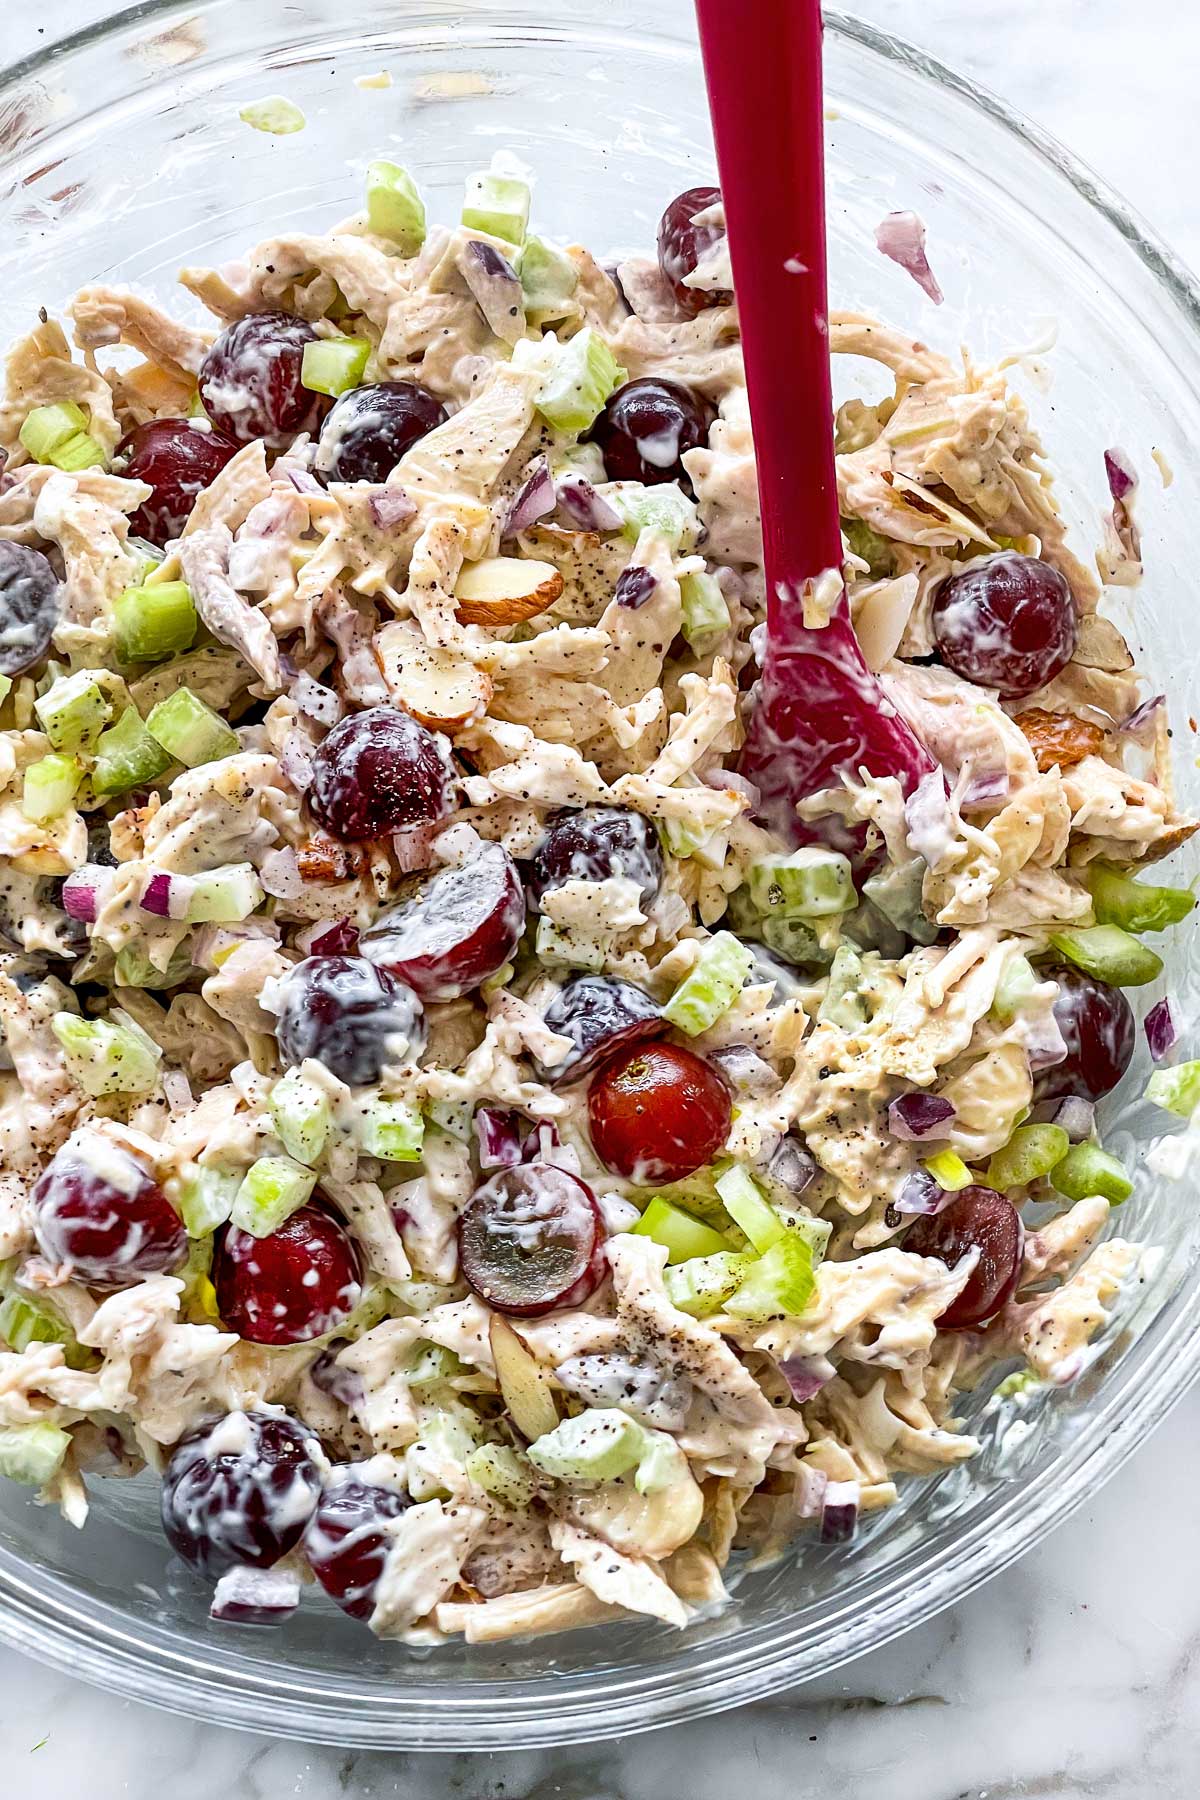 Central Market Chicken Salad Recipe: Delicious and Easy to Make